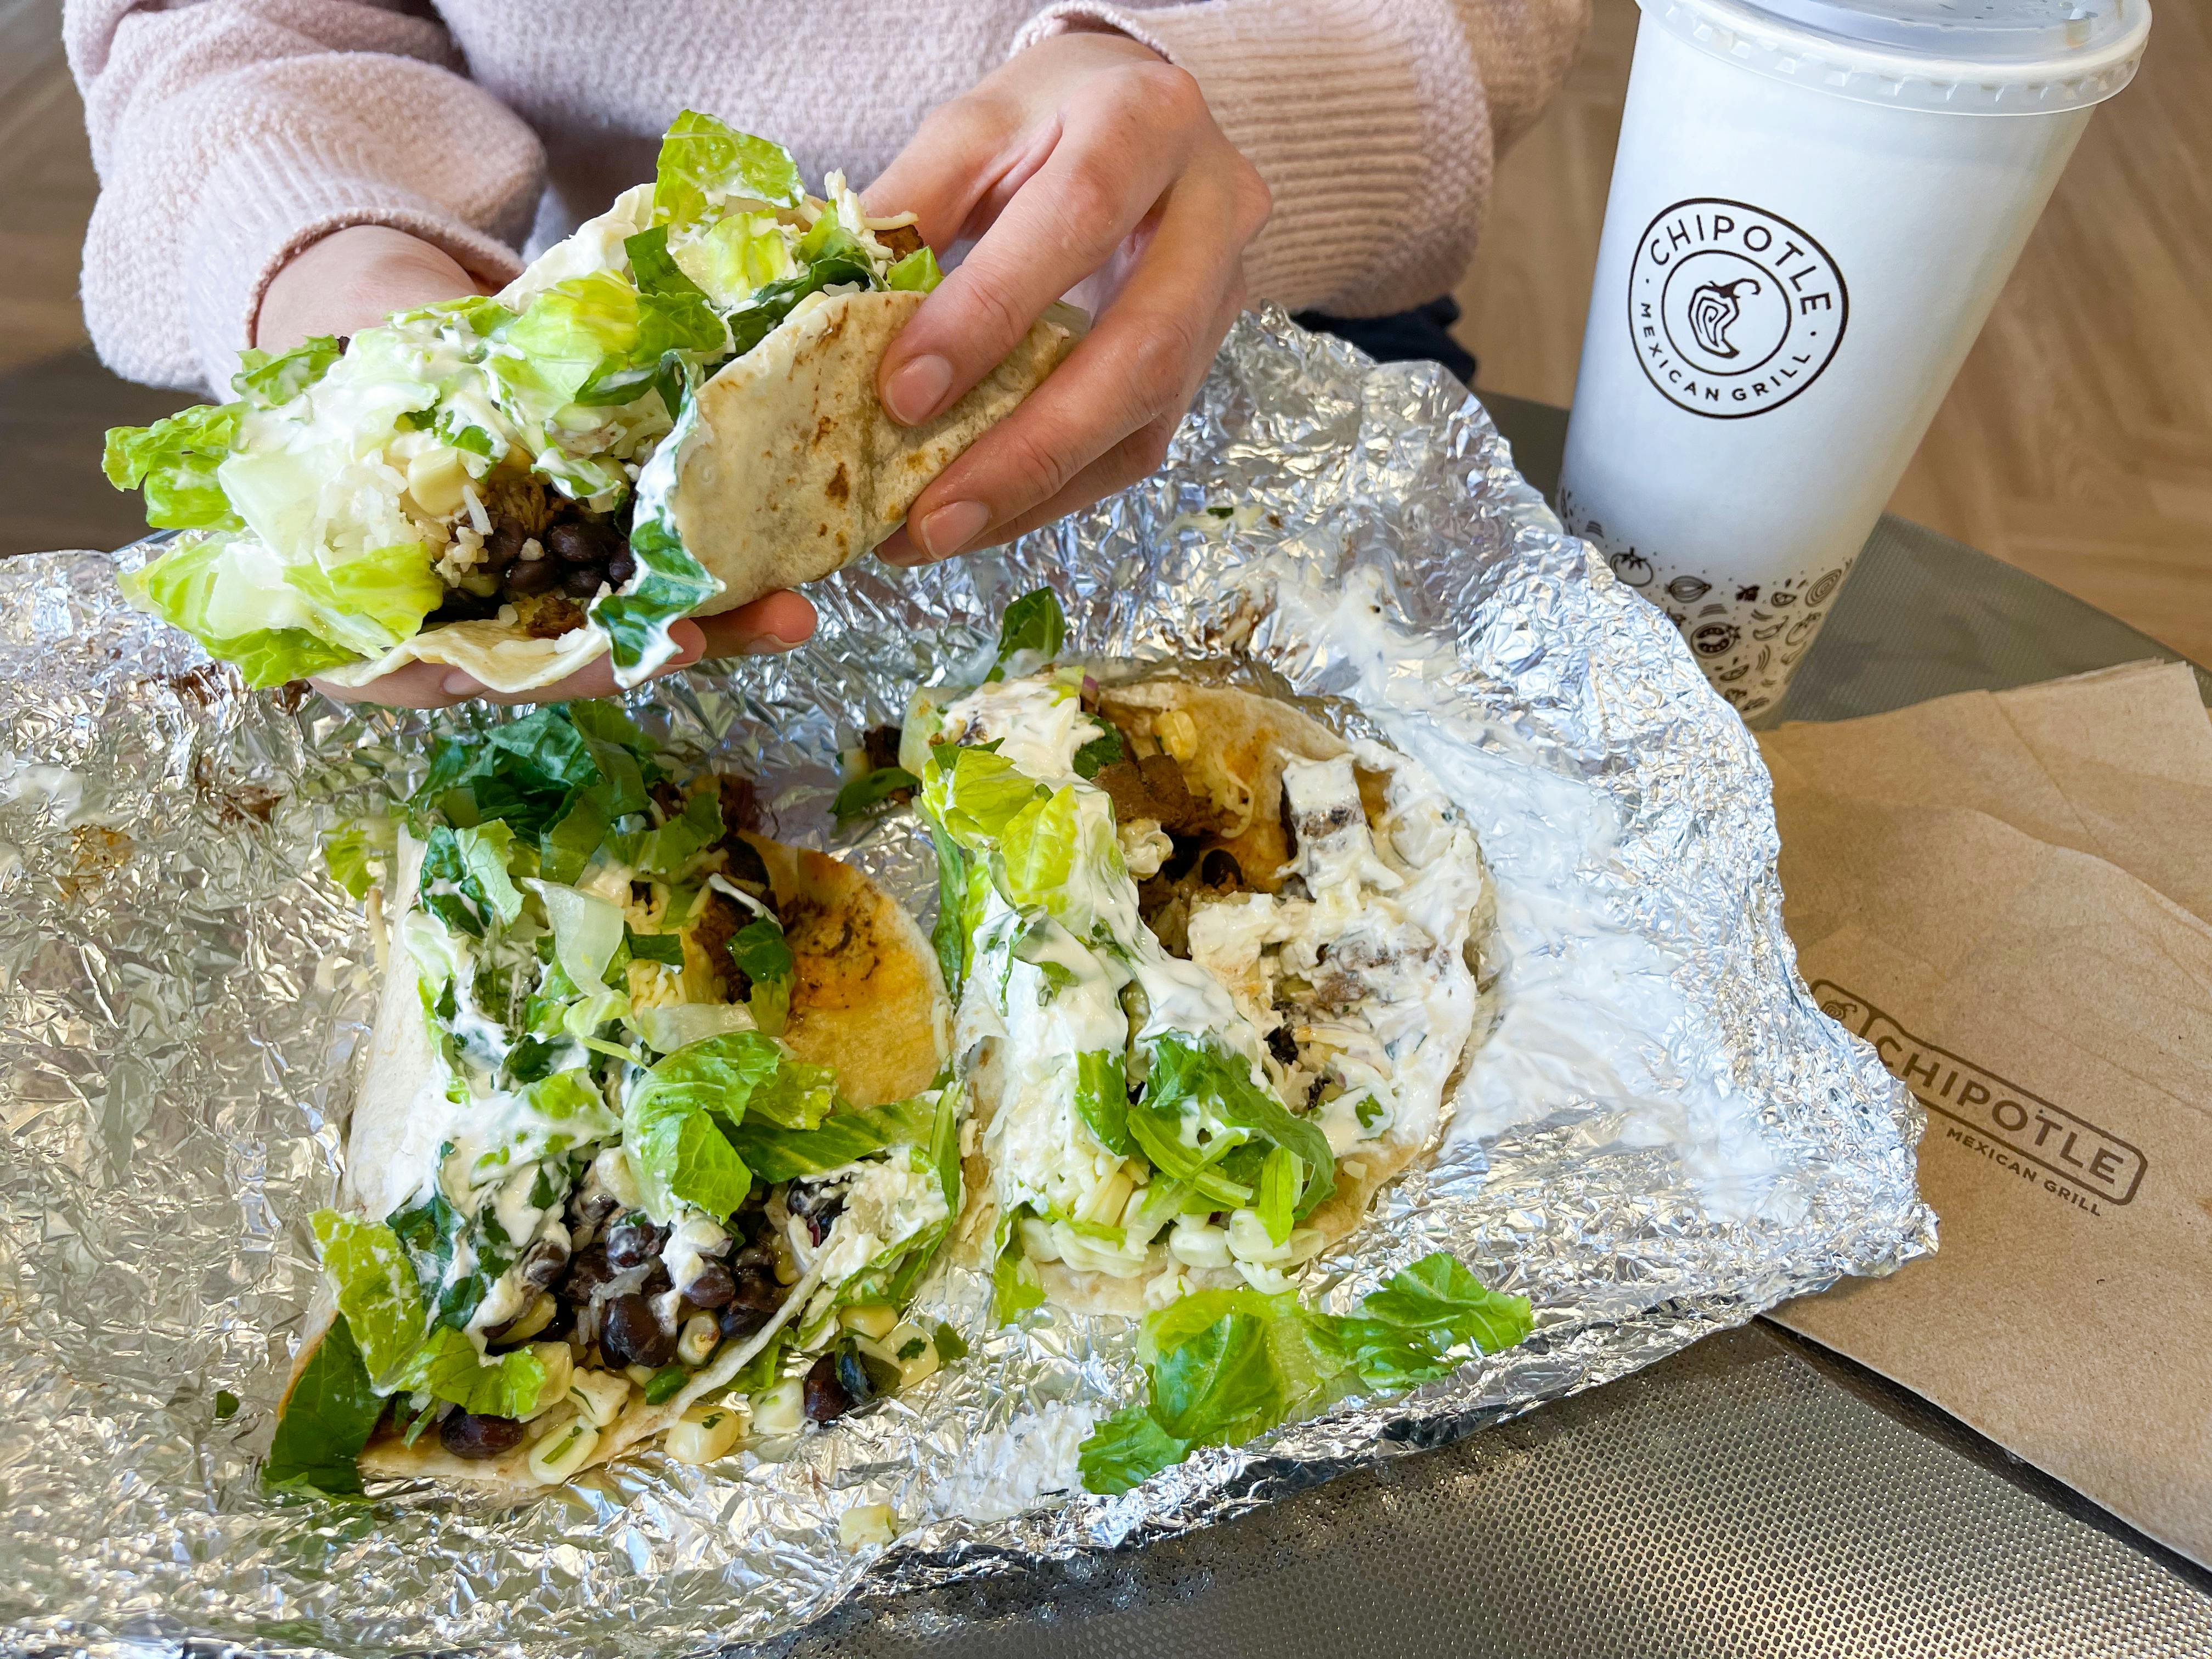 Did You Get Chipotle Delivered? You May Be Owed Money